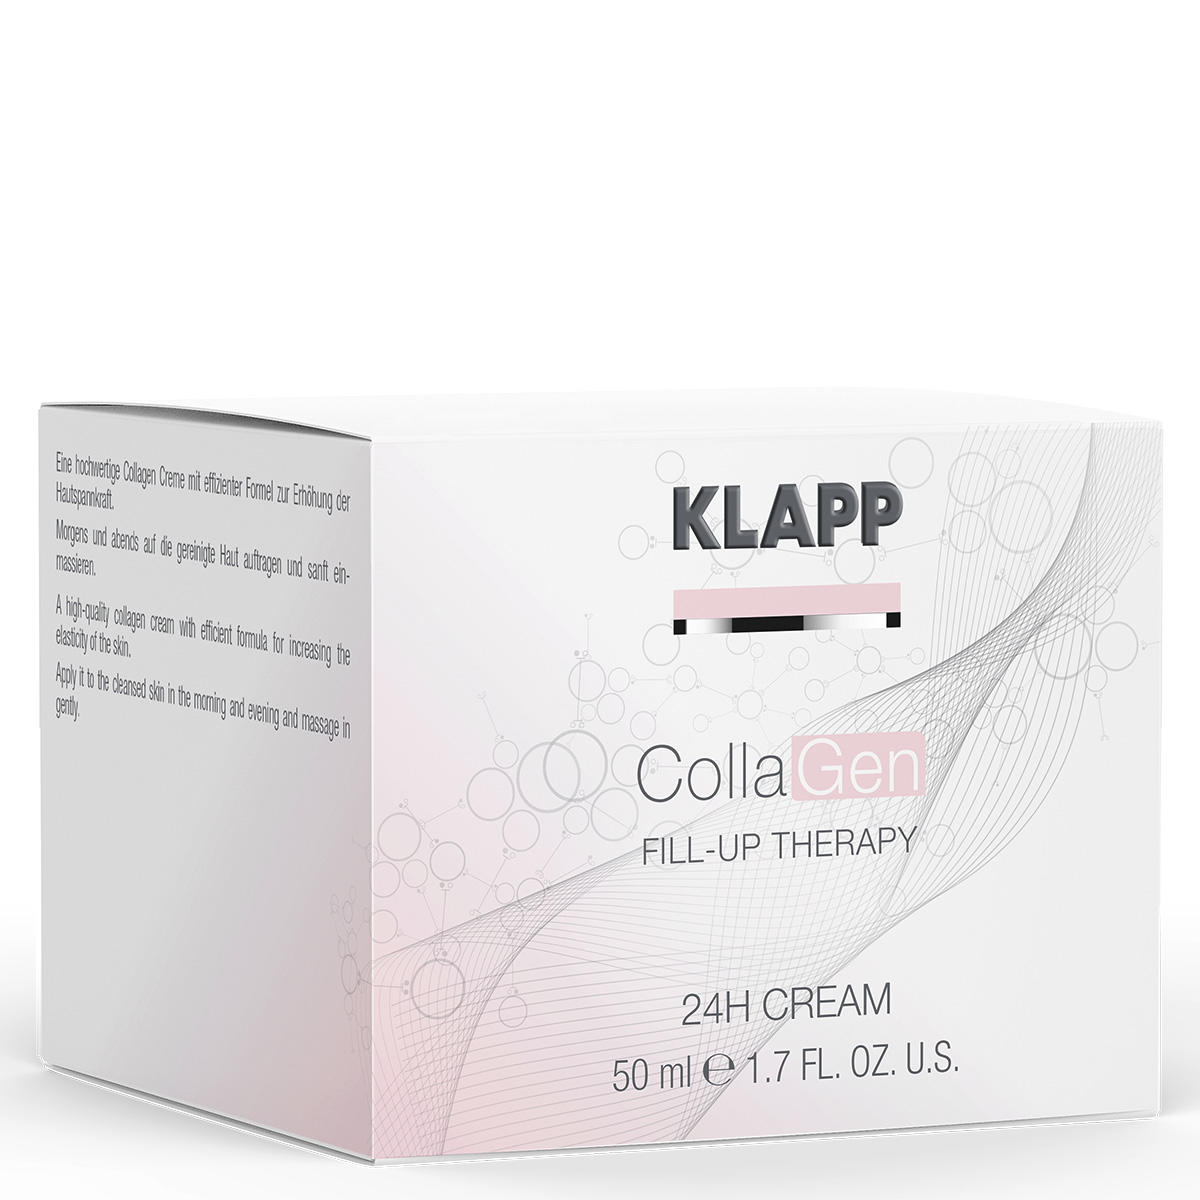 KLAPP CollaGen Fill-Up Therapy 24H Cream 50 ml - 2